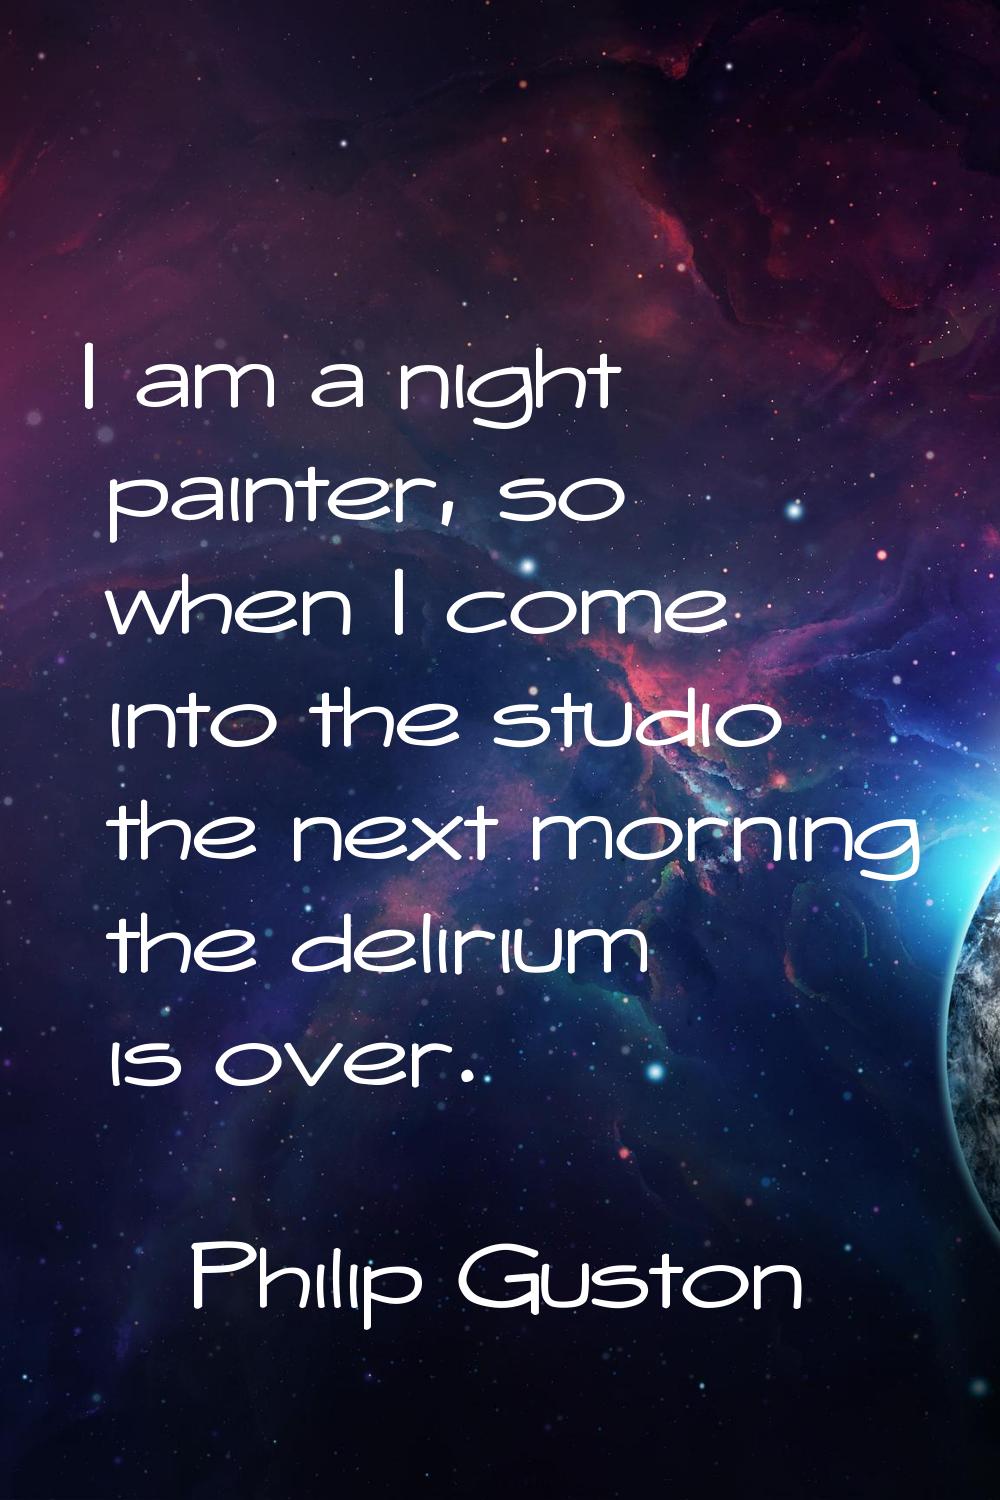 I am a night painter, so when I come into the studio the next morning the delirium is over.